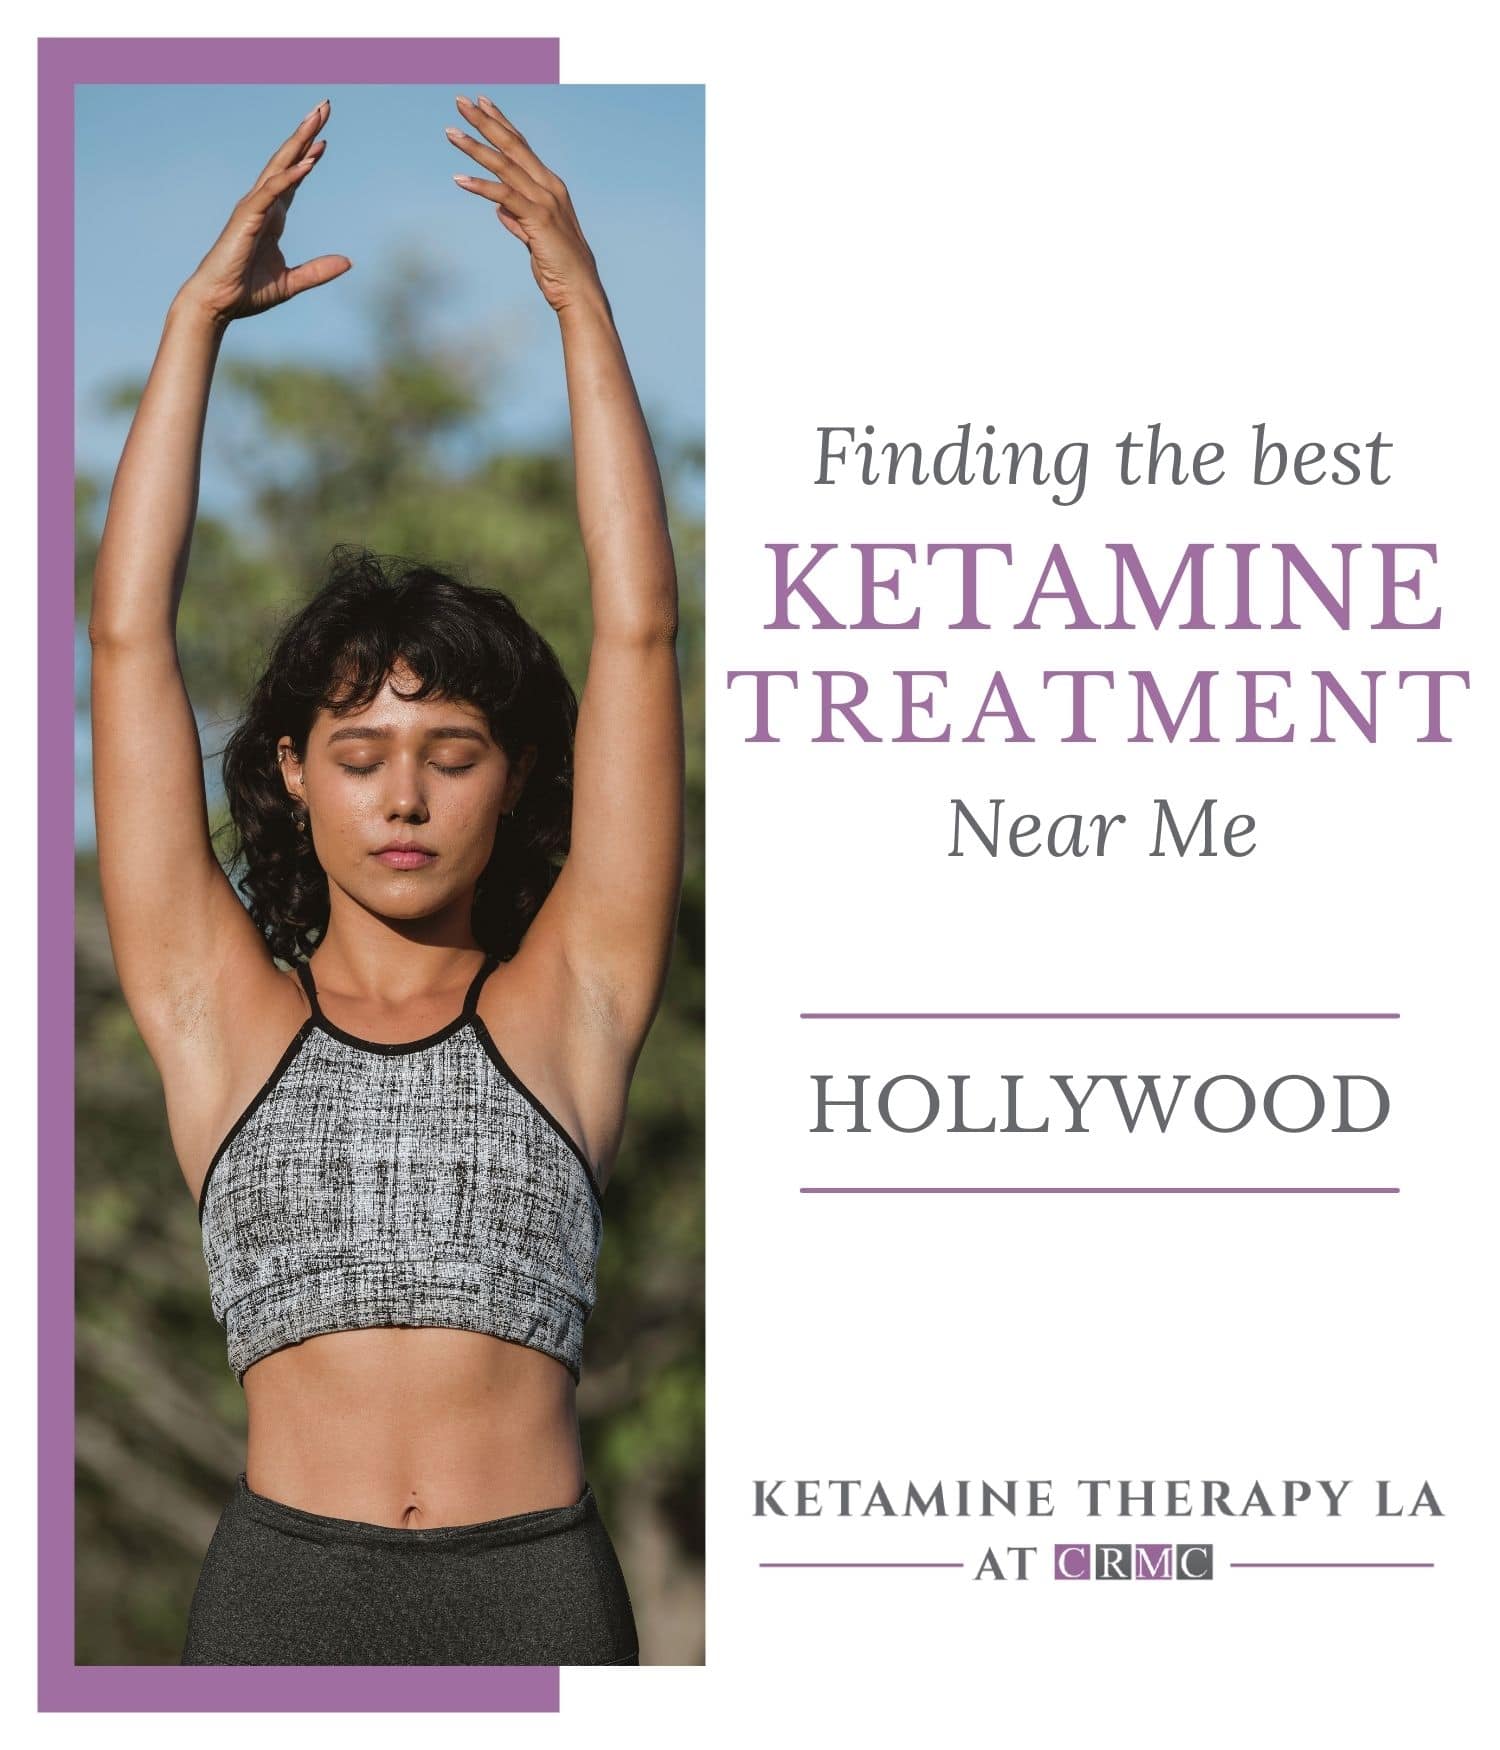 Woman looking content after Ketamine treatment.